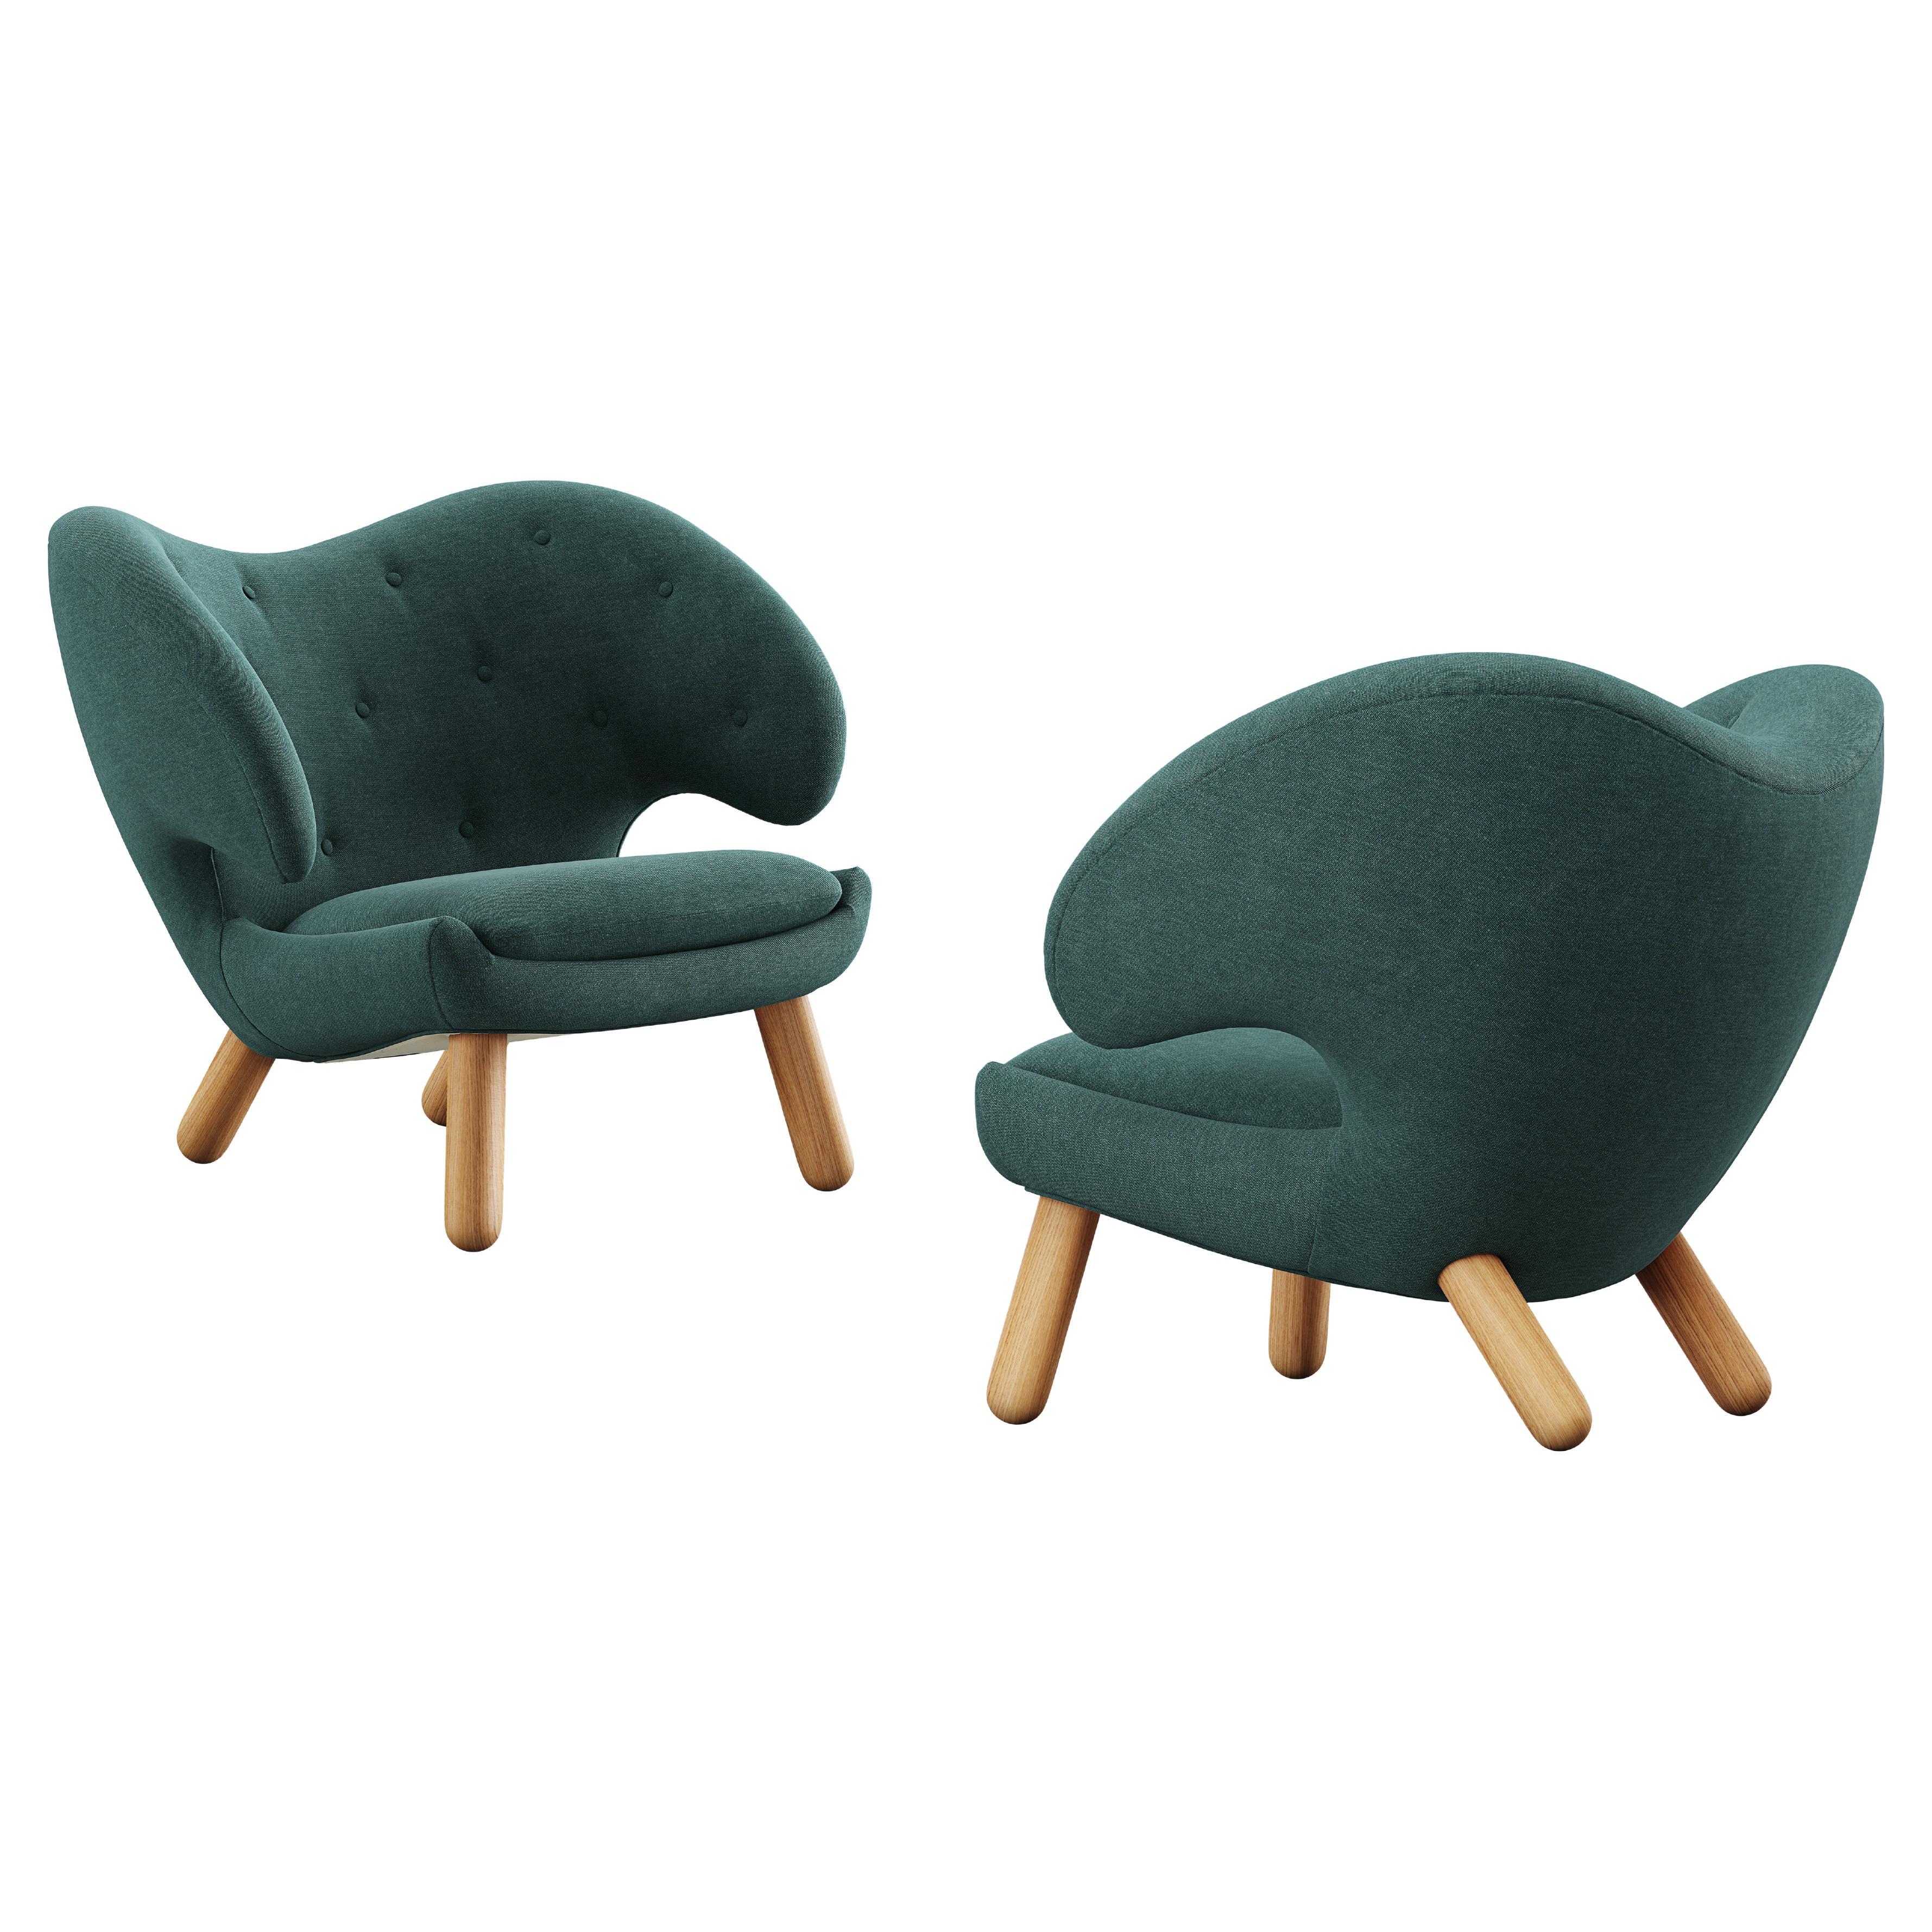 Set of Two Finn Juhl Pelican Chairs Upholstered in Wood and Fabric